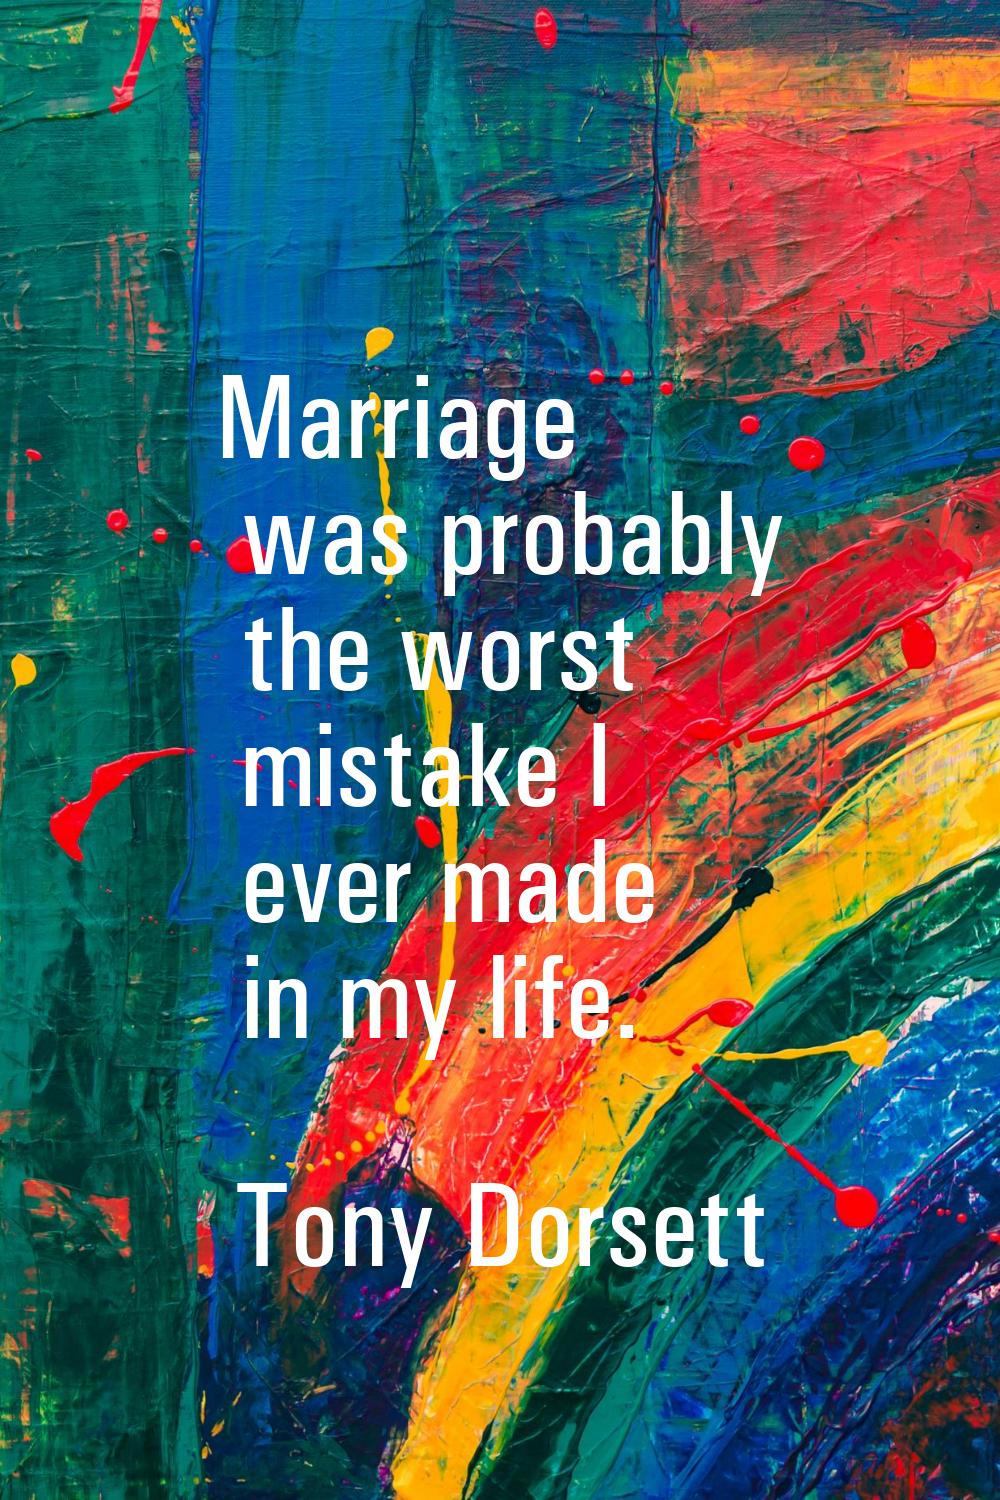 Marriage was probably the worst mistake I ever made in my life.